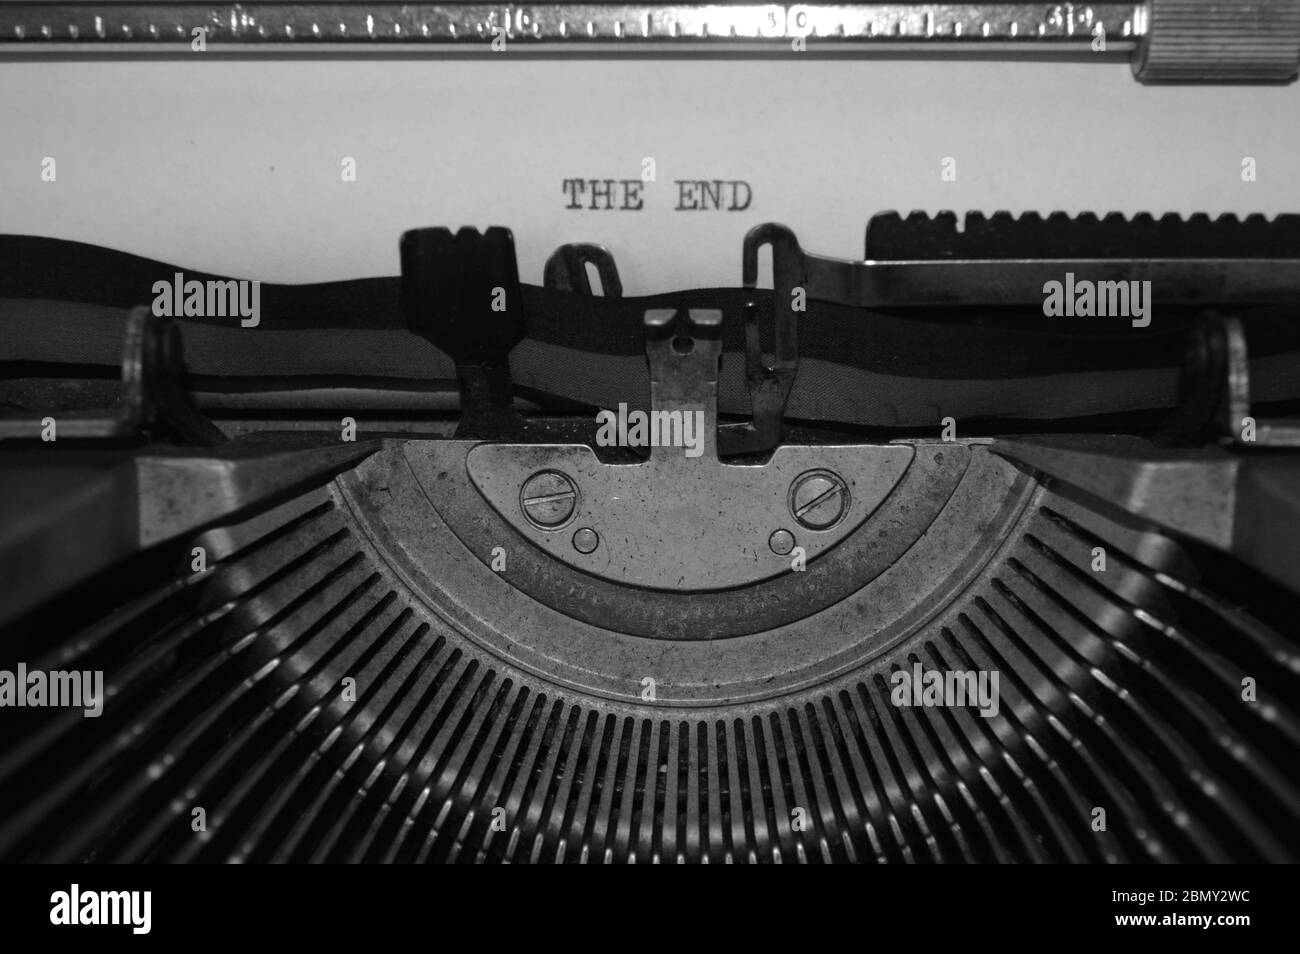 text message the end with old typewriter vintage Stock Photo